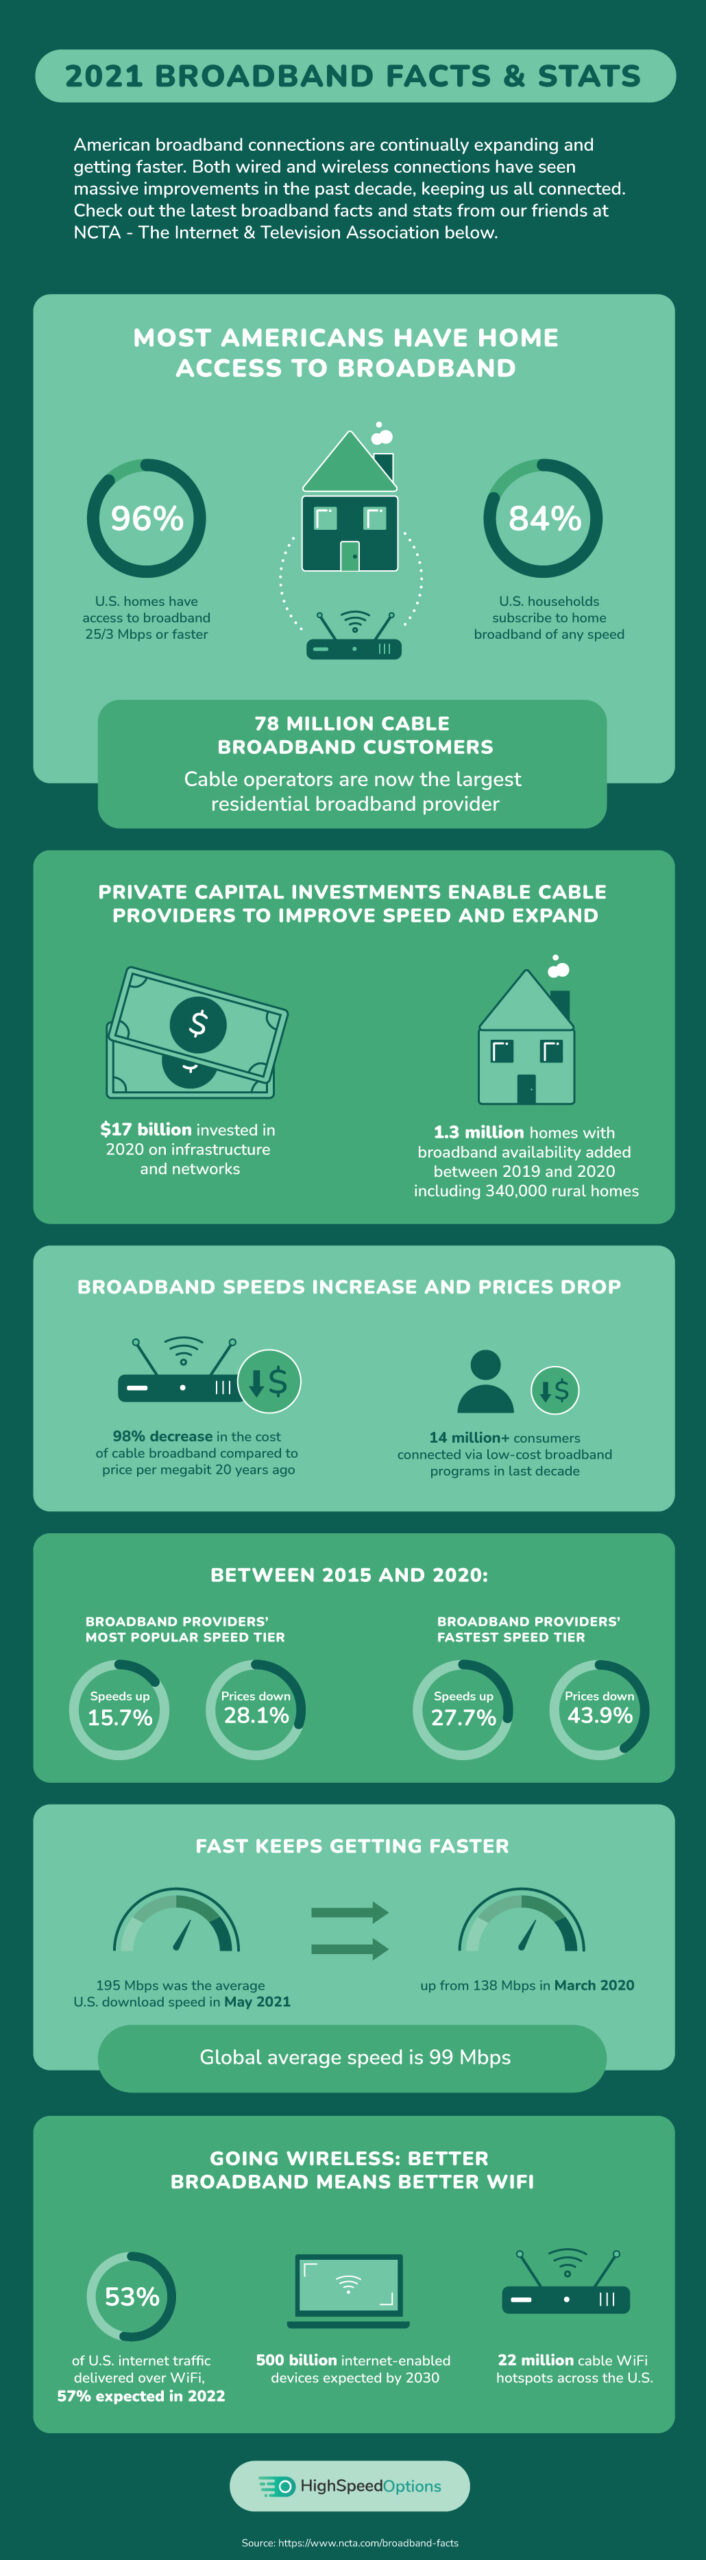 broadband facts and stats infographic